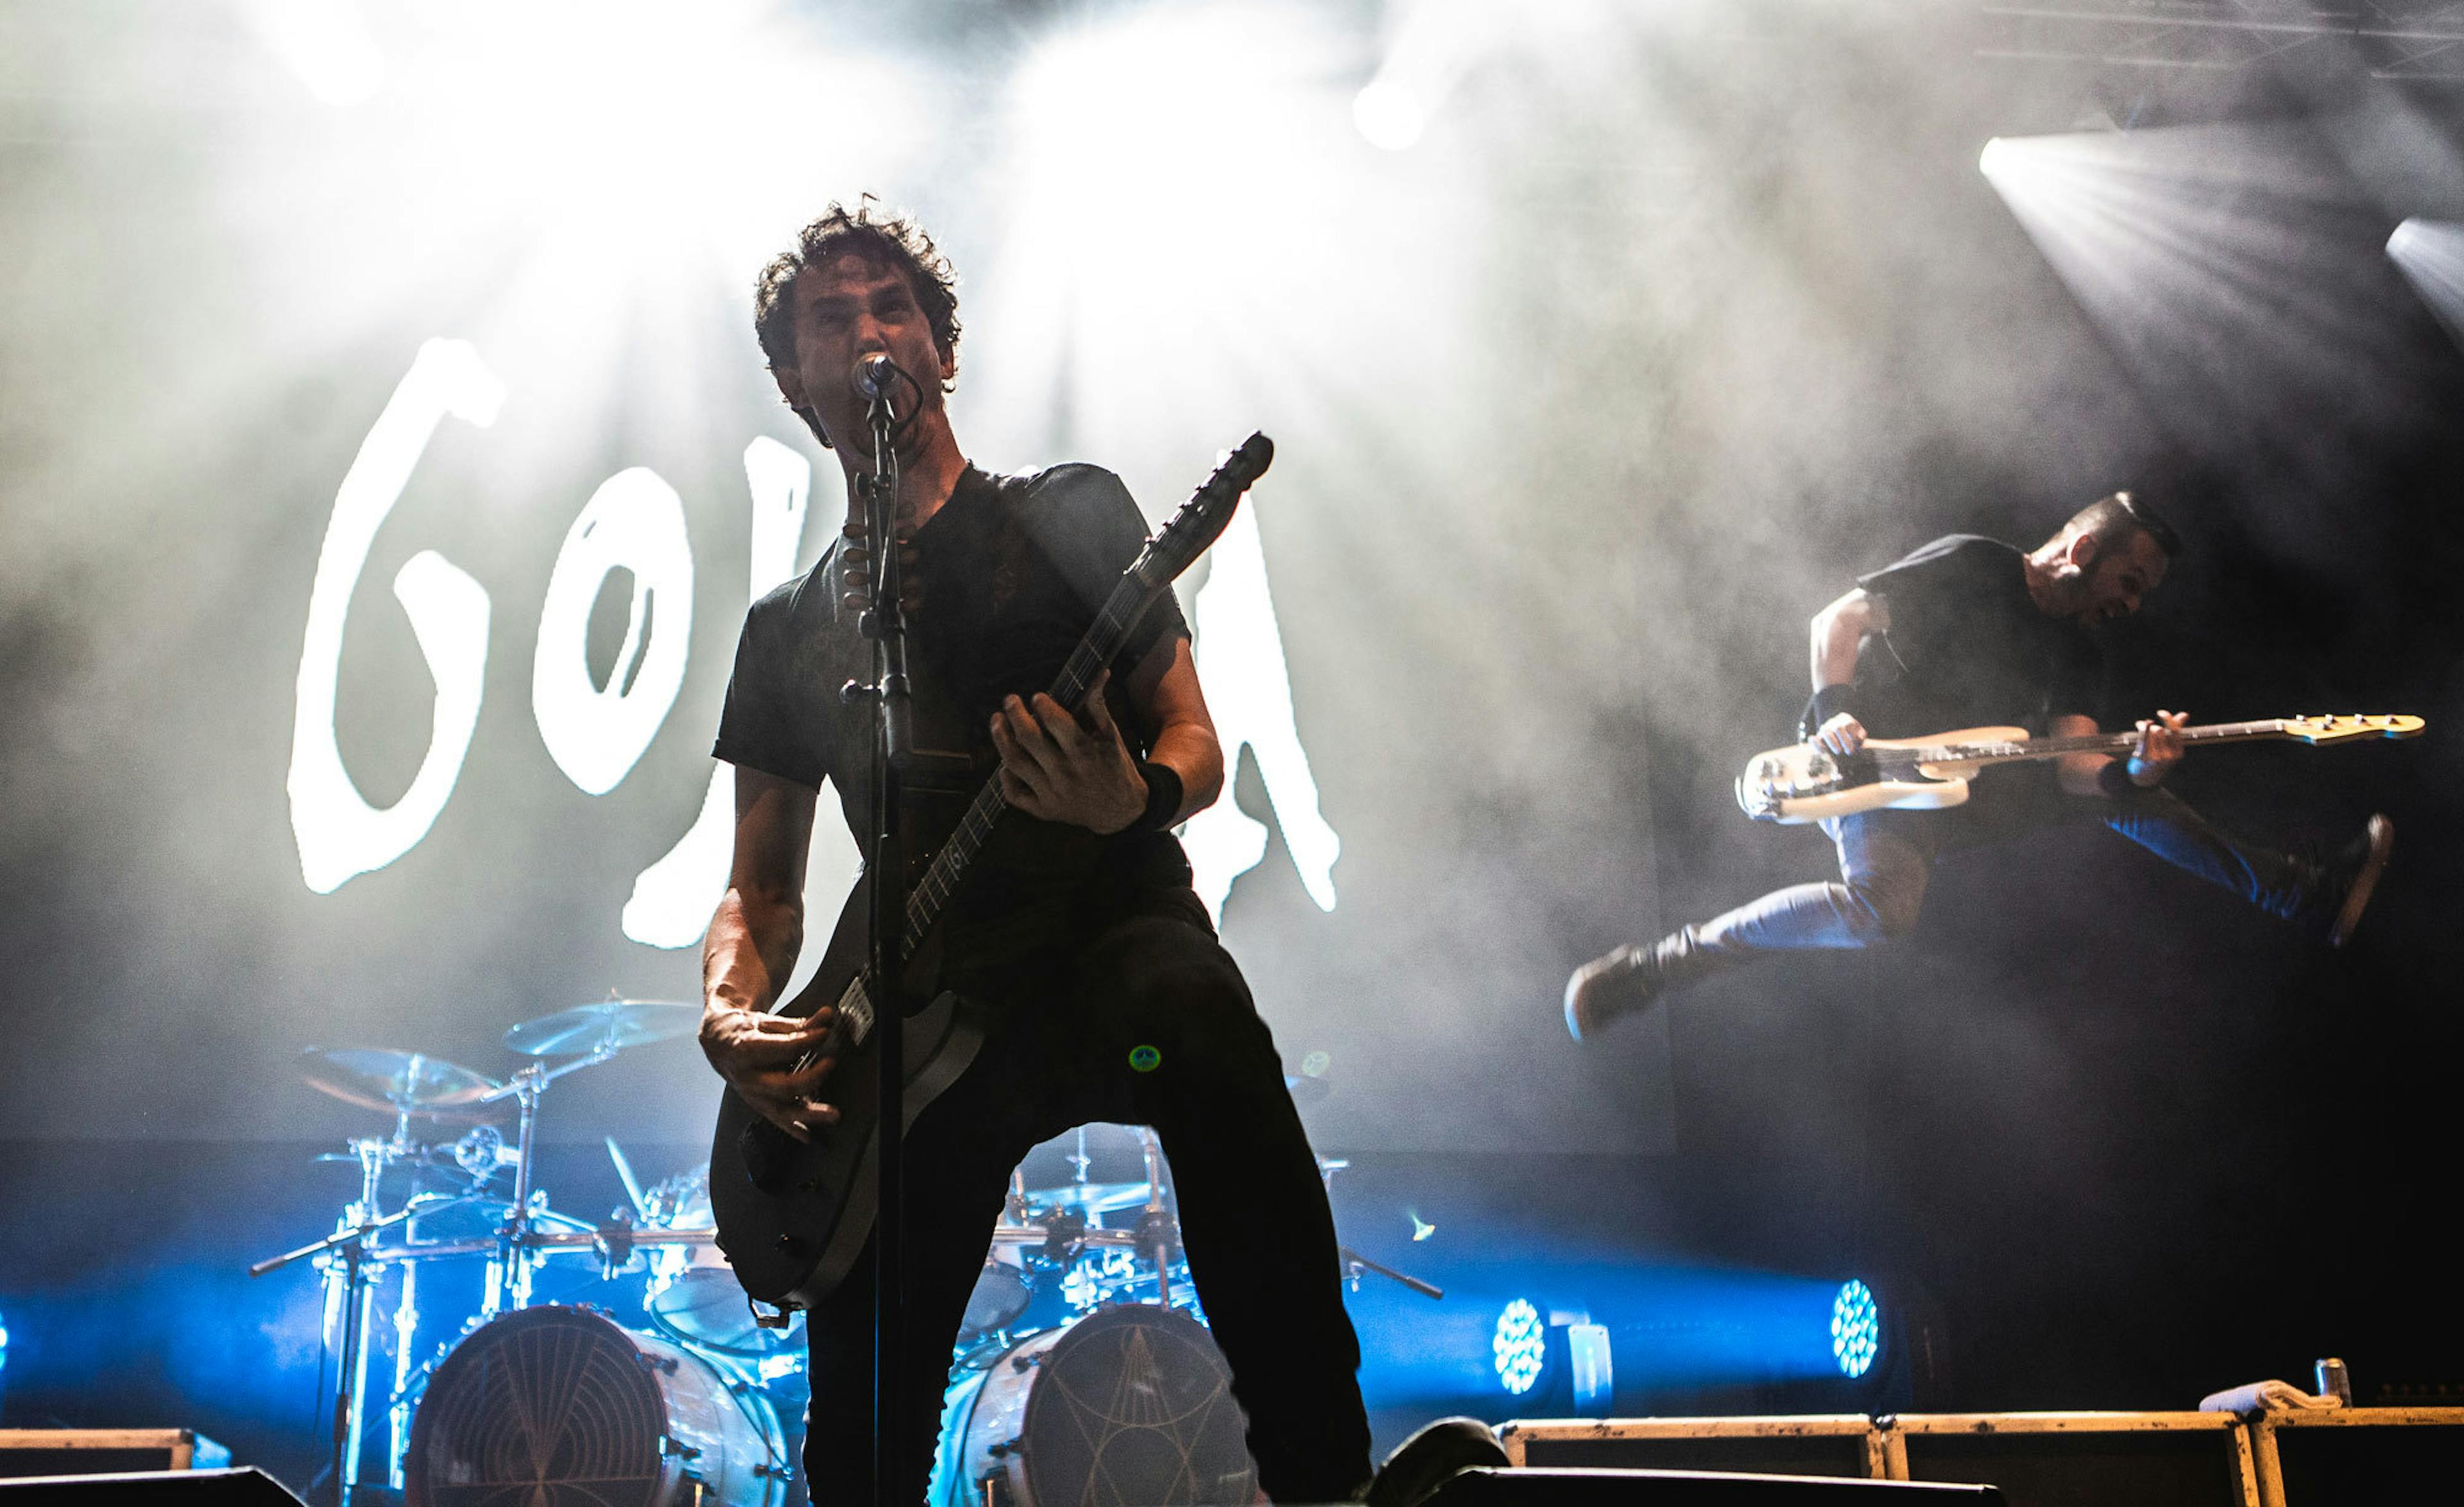 Gojira Cancel All 2020 Touring Plans